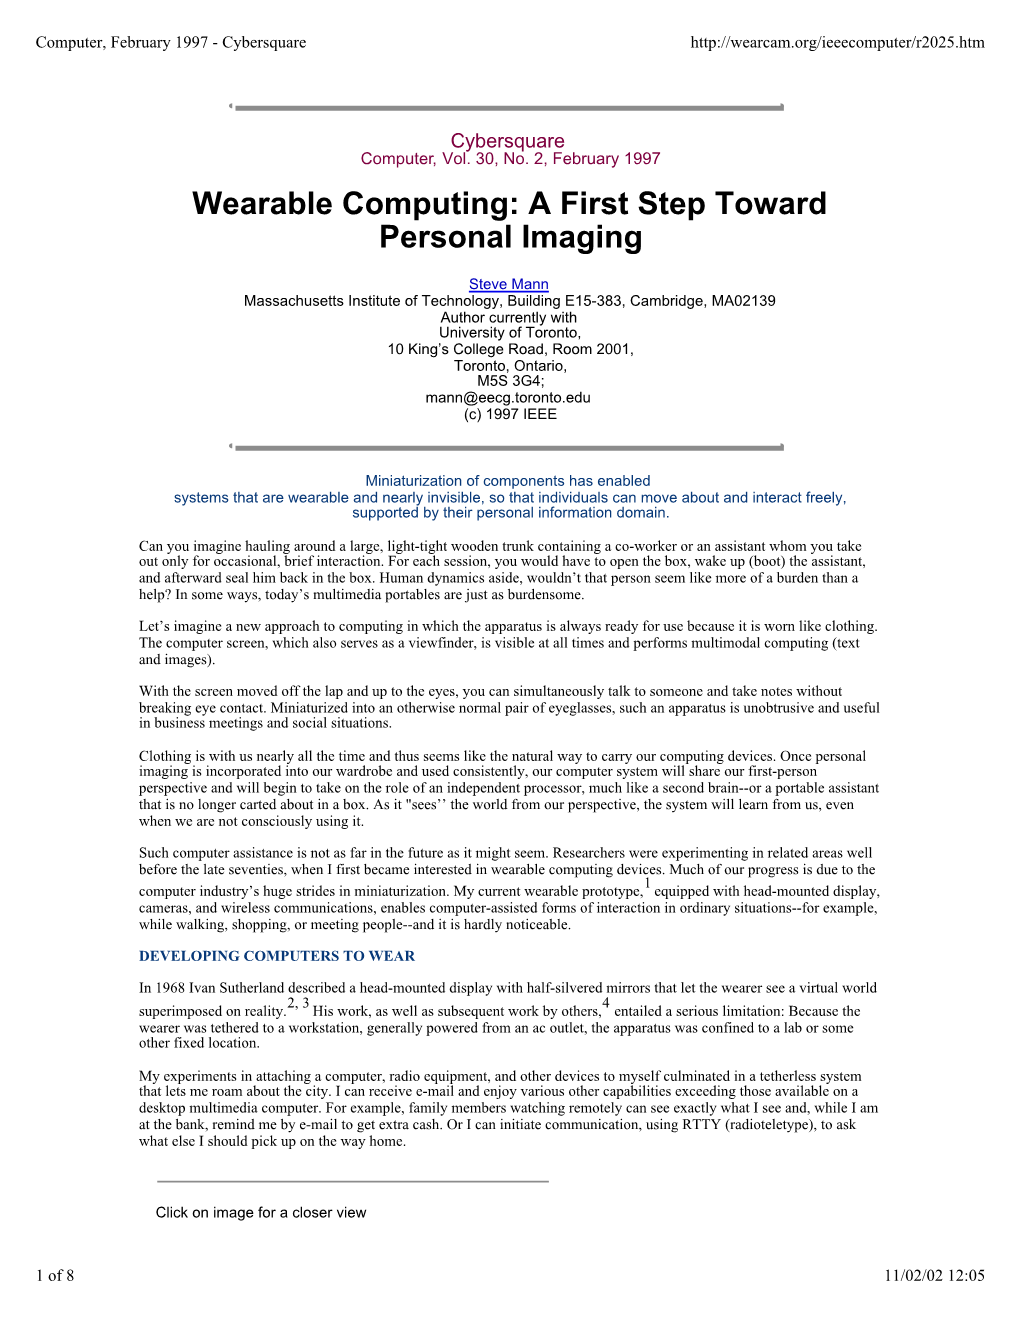 Wearable Computing: a First Step Toward Personal Imaging